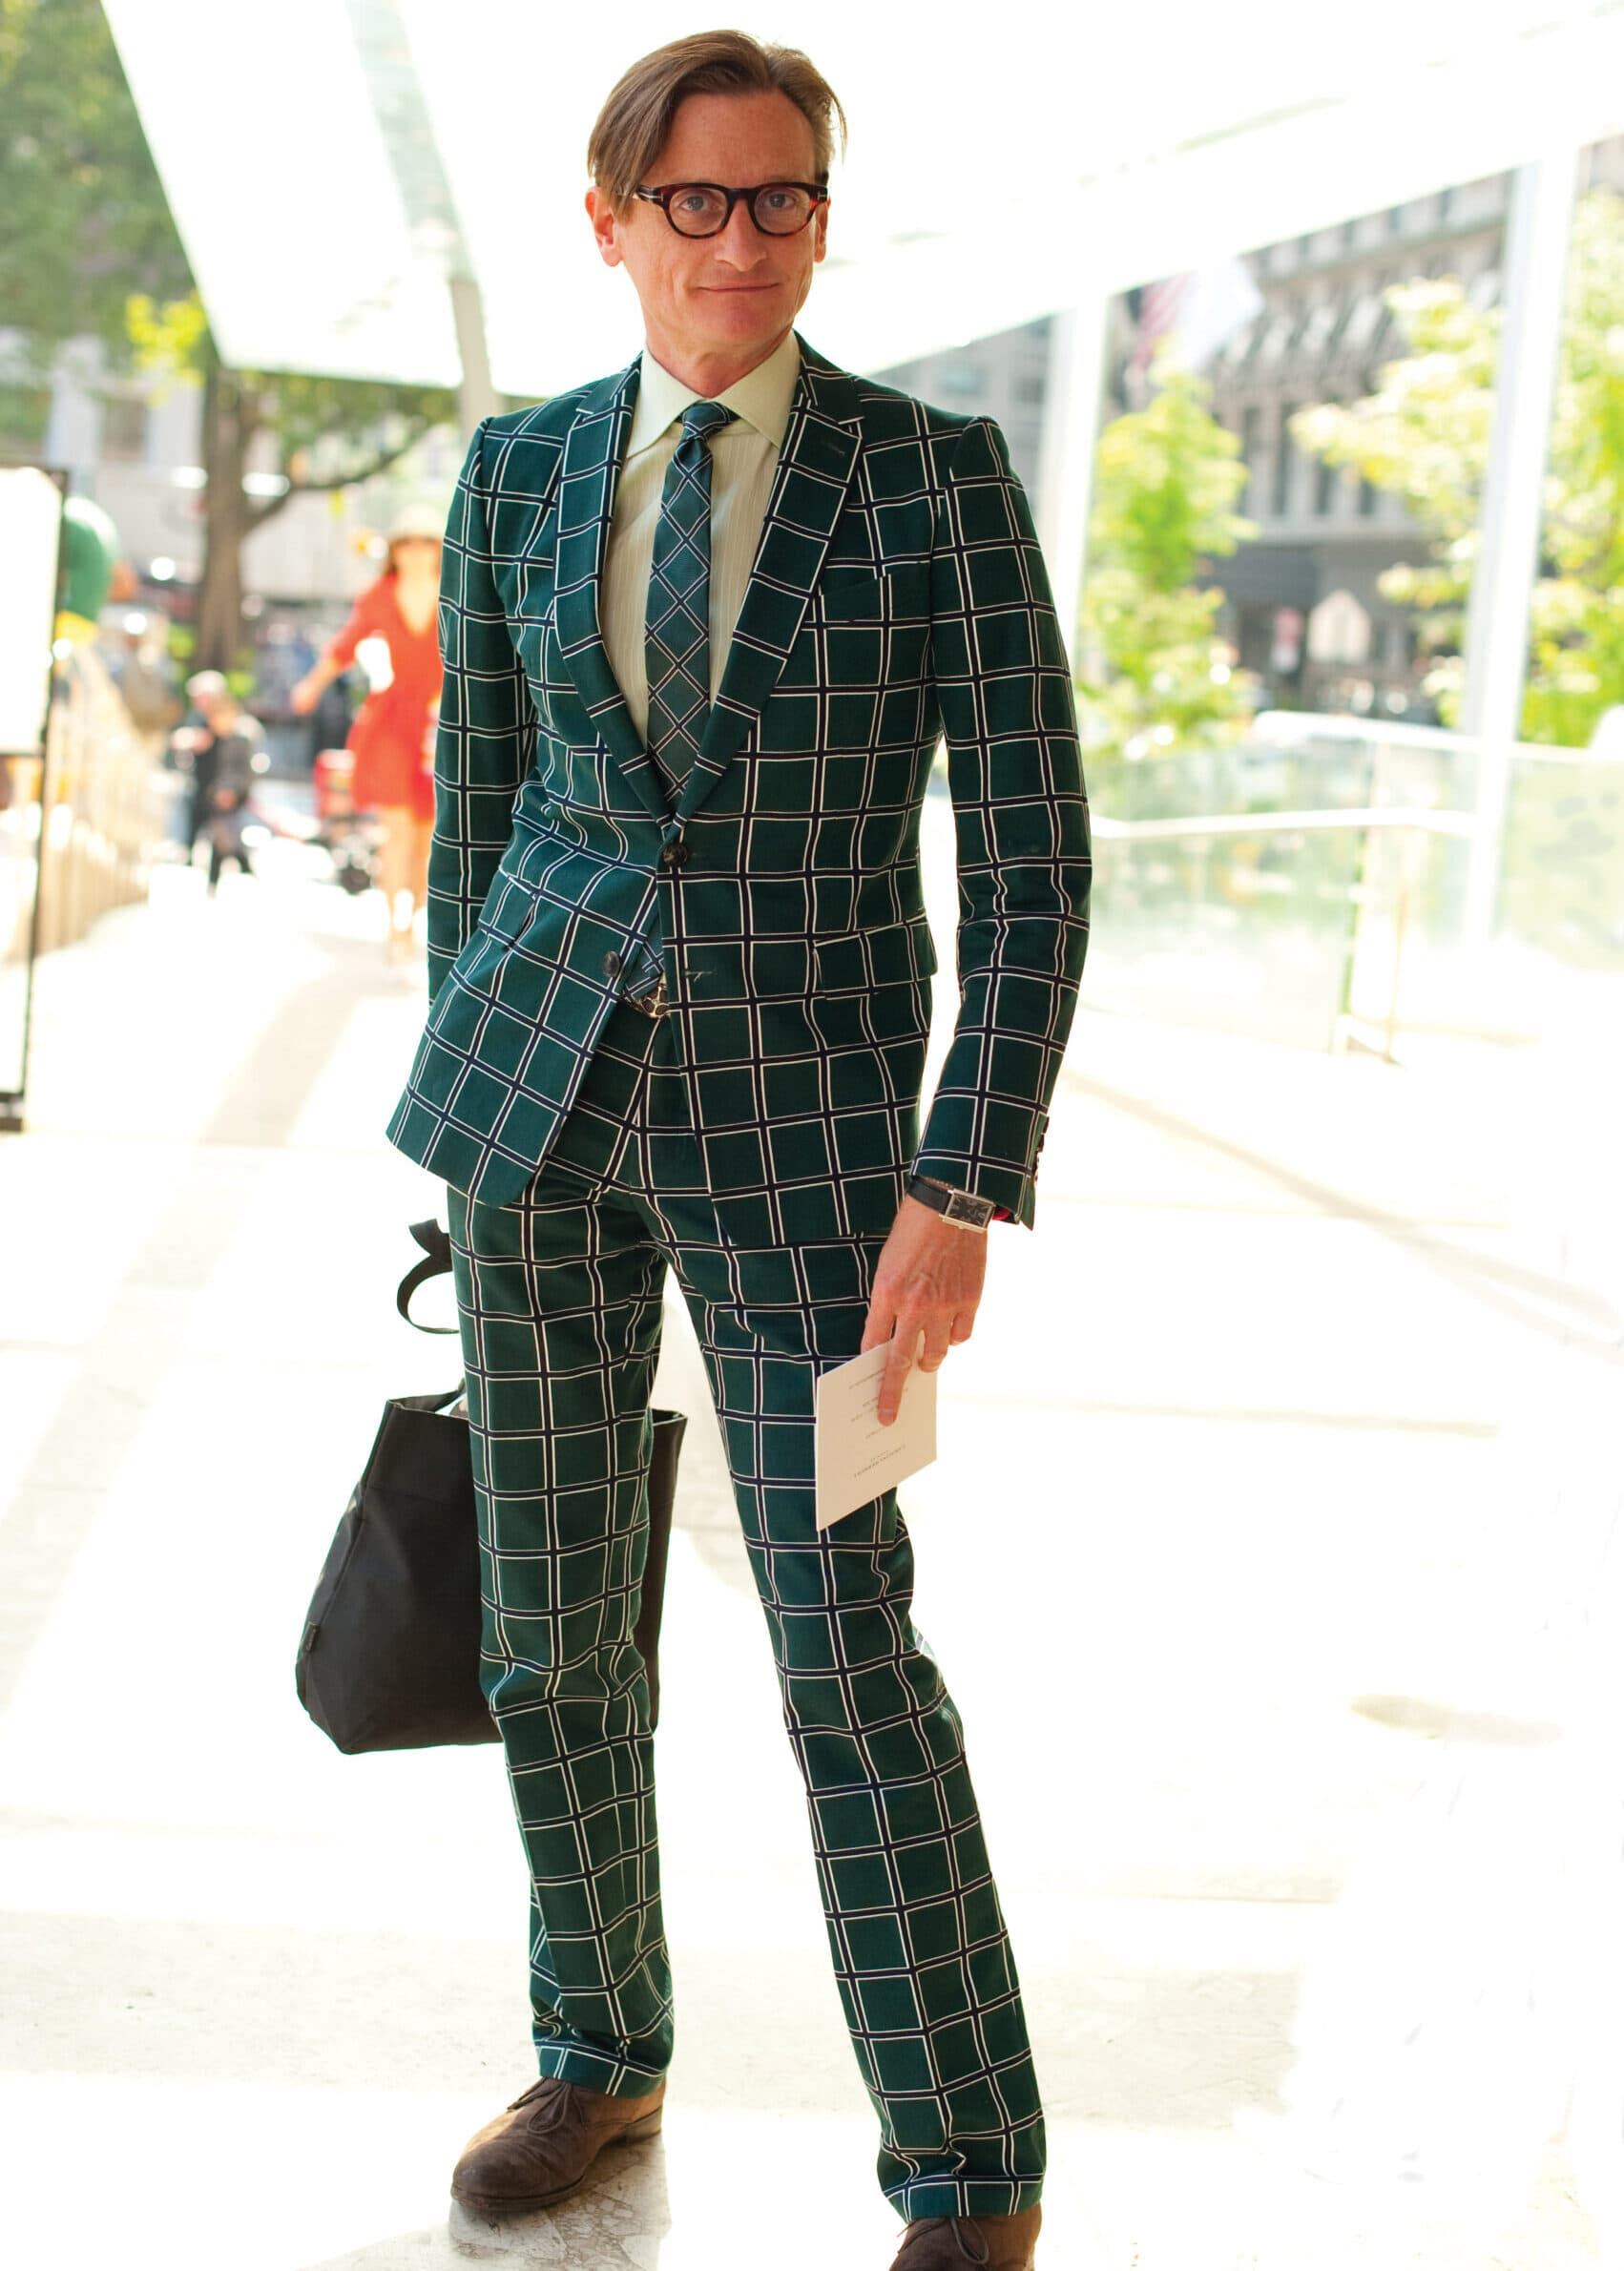 We're Inspired By Dandy Style With an Edge – Frederic Magazine